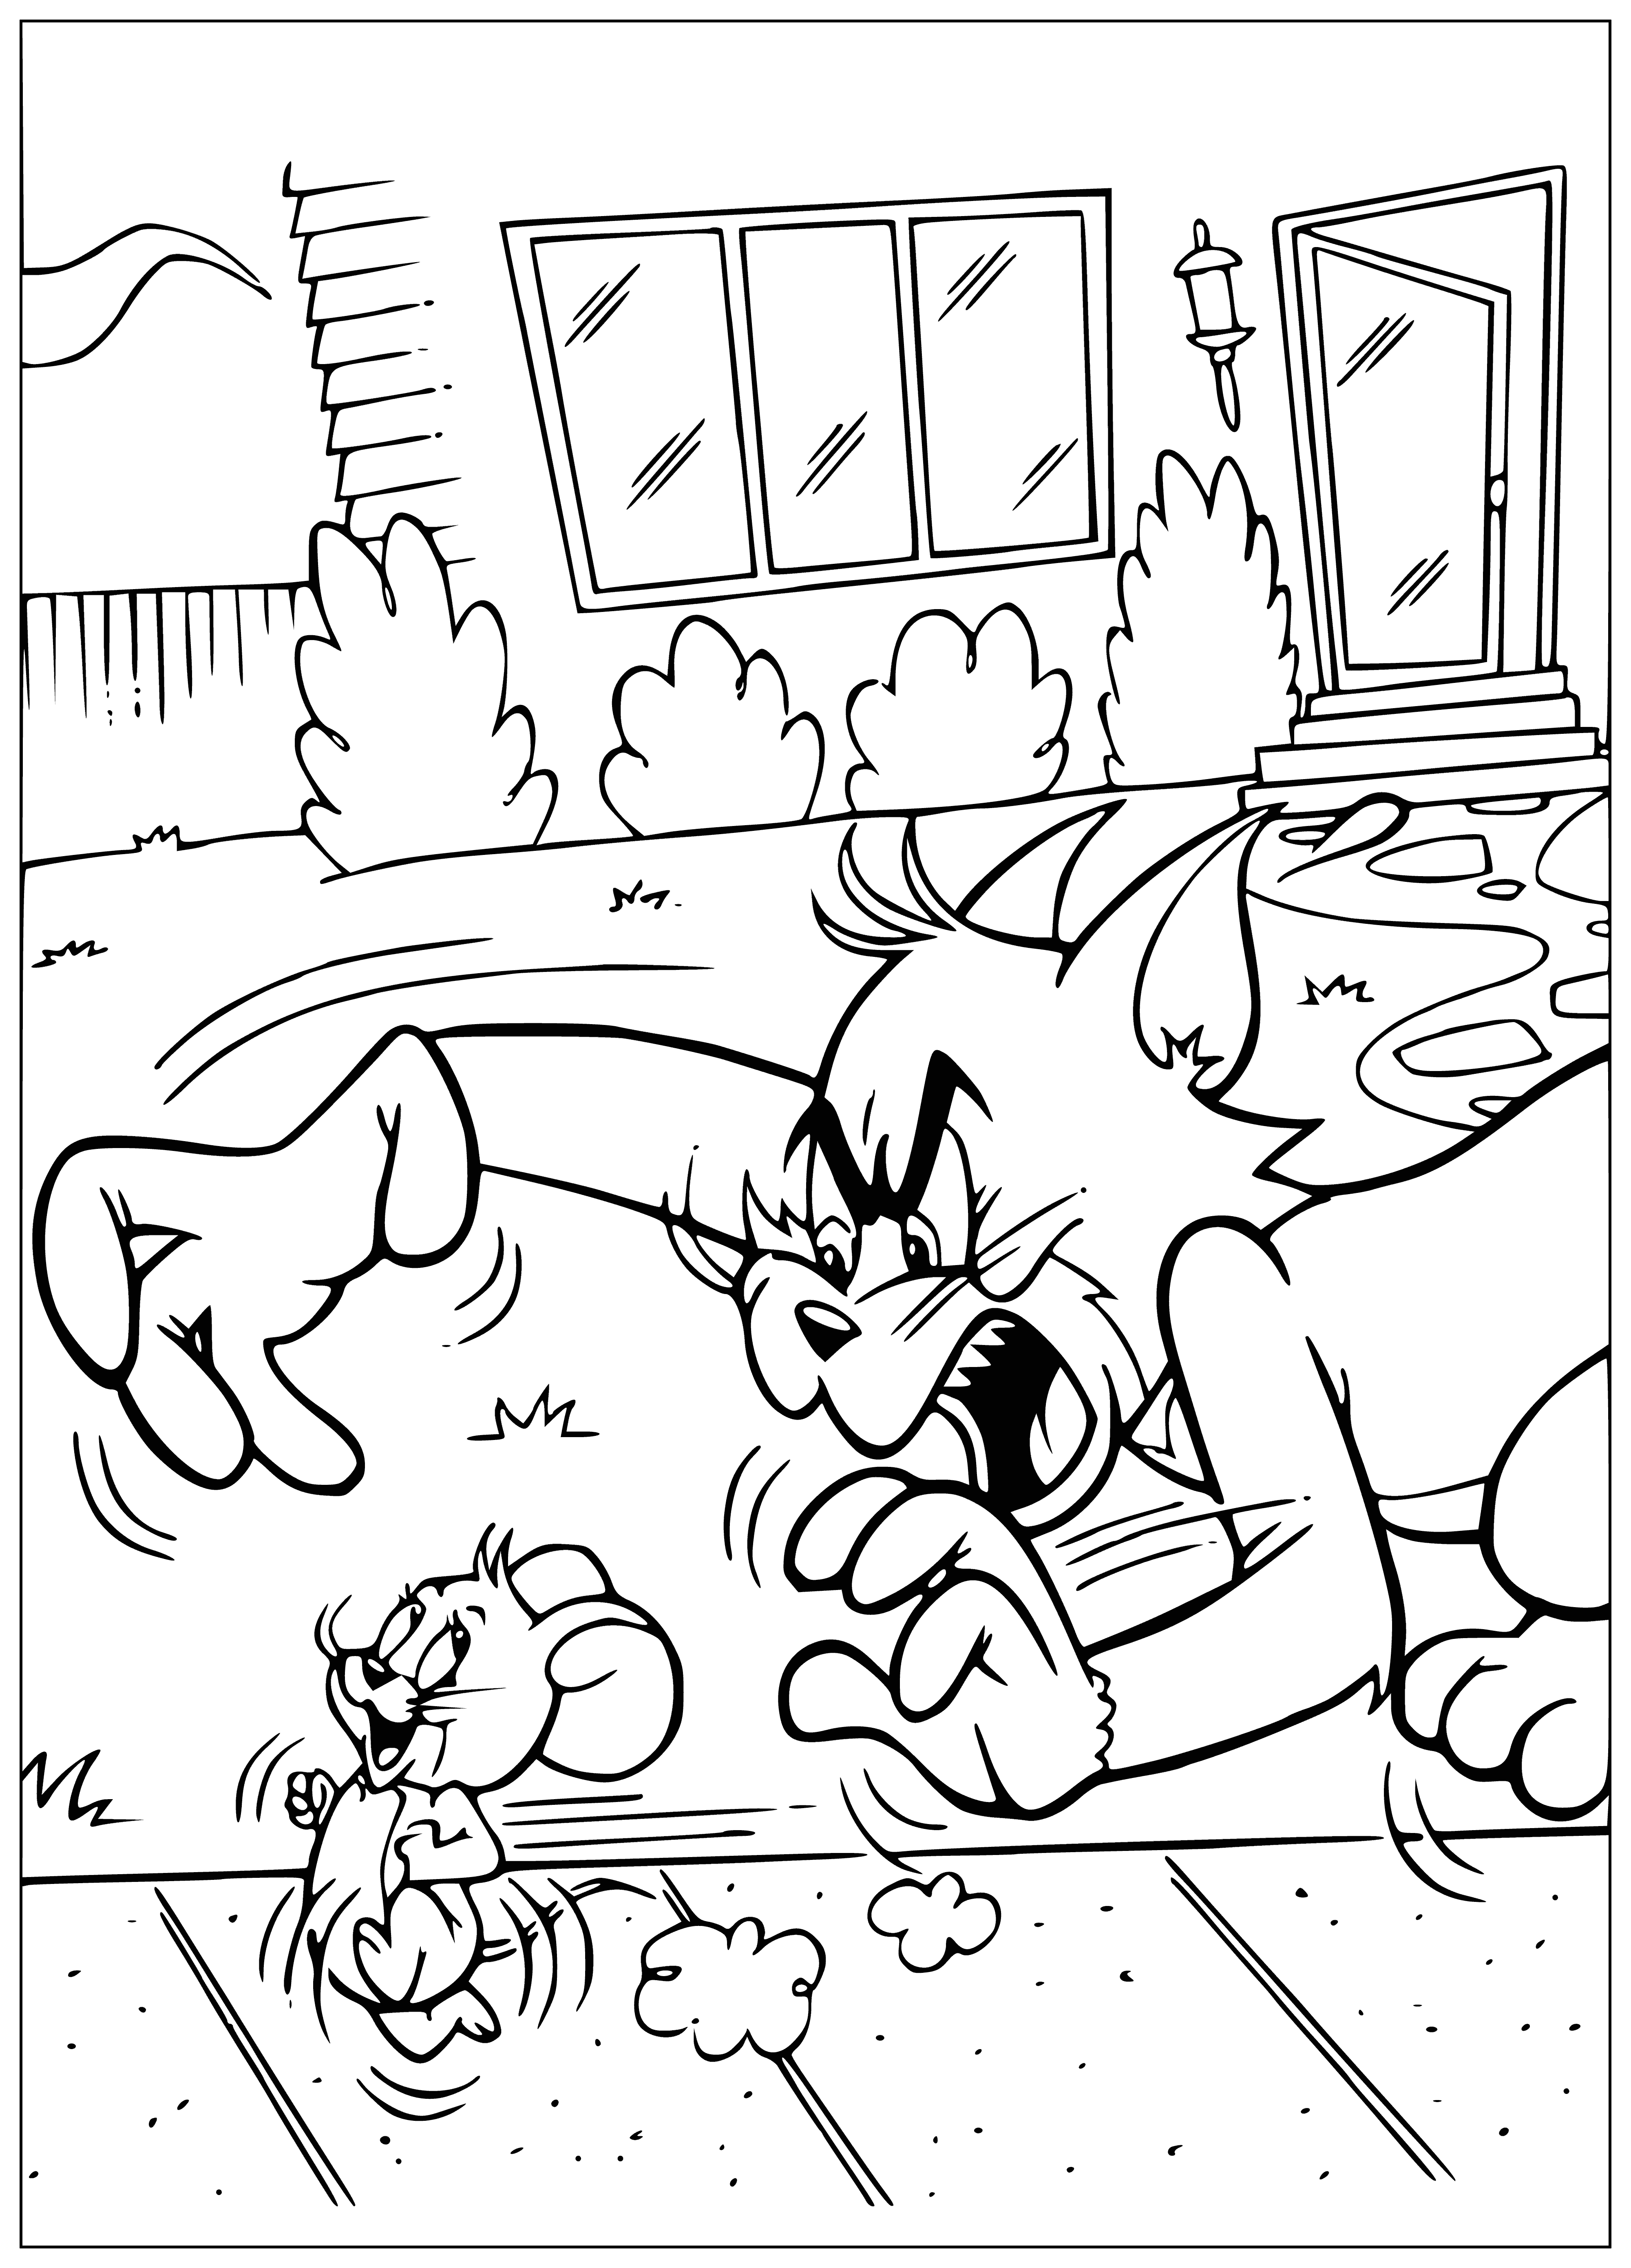 Tom catches up with Jerry coloring page